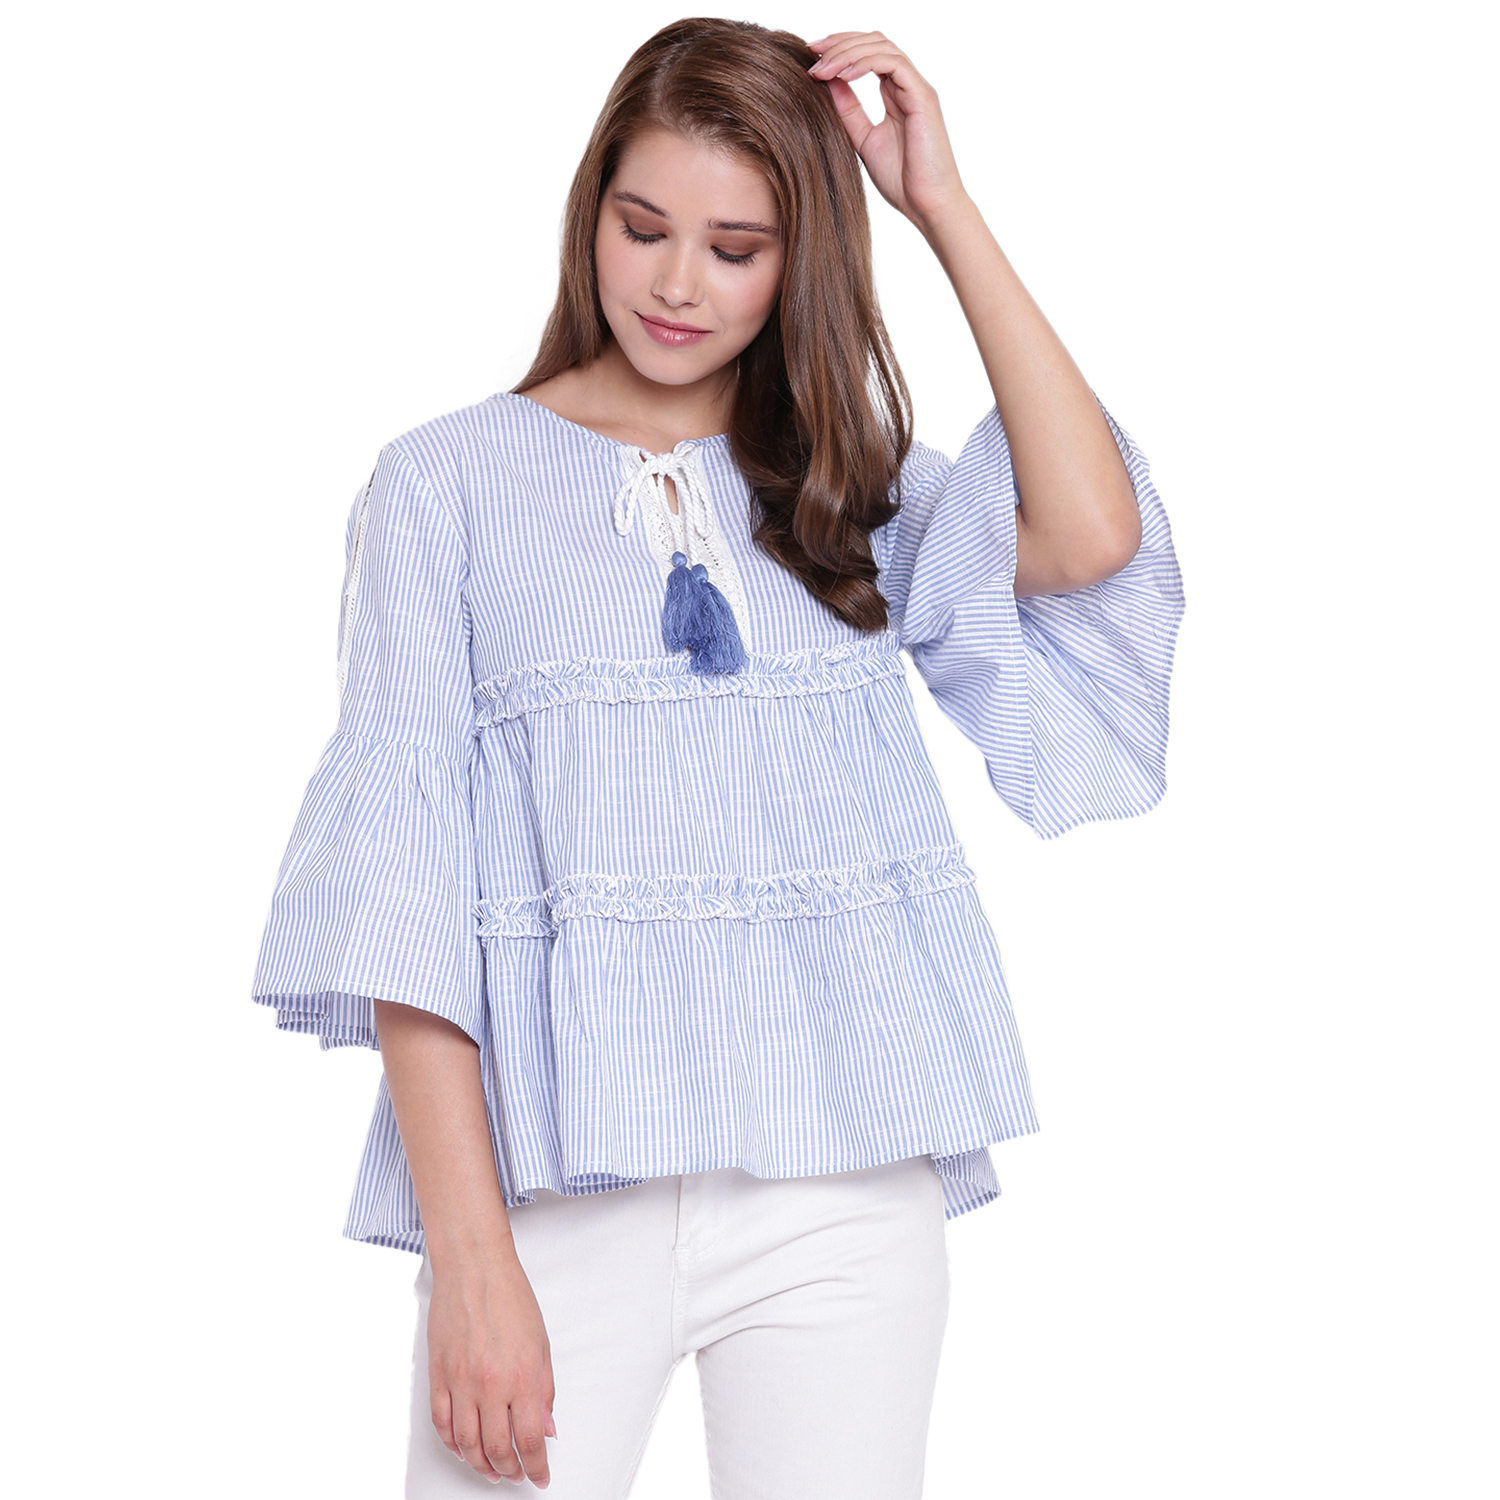 Buy Label Regalia Striped Lace Top Online @ ₹500 from ShopClues